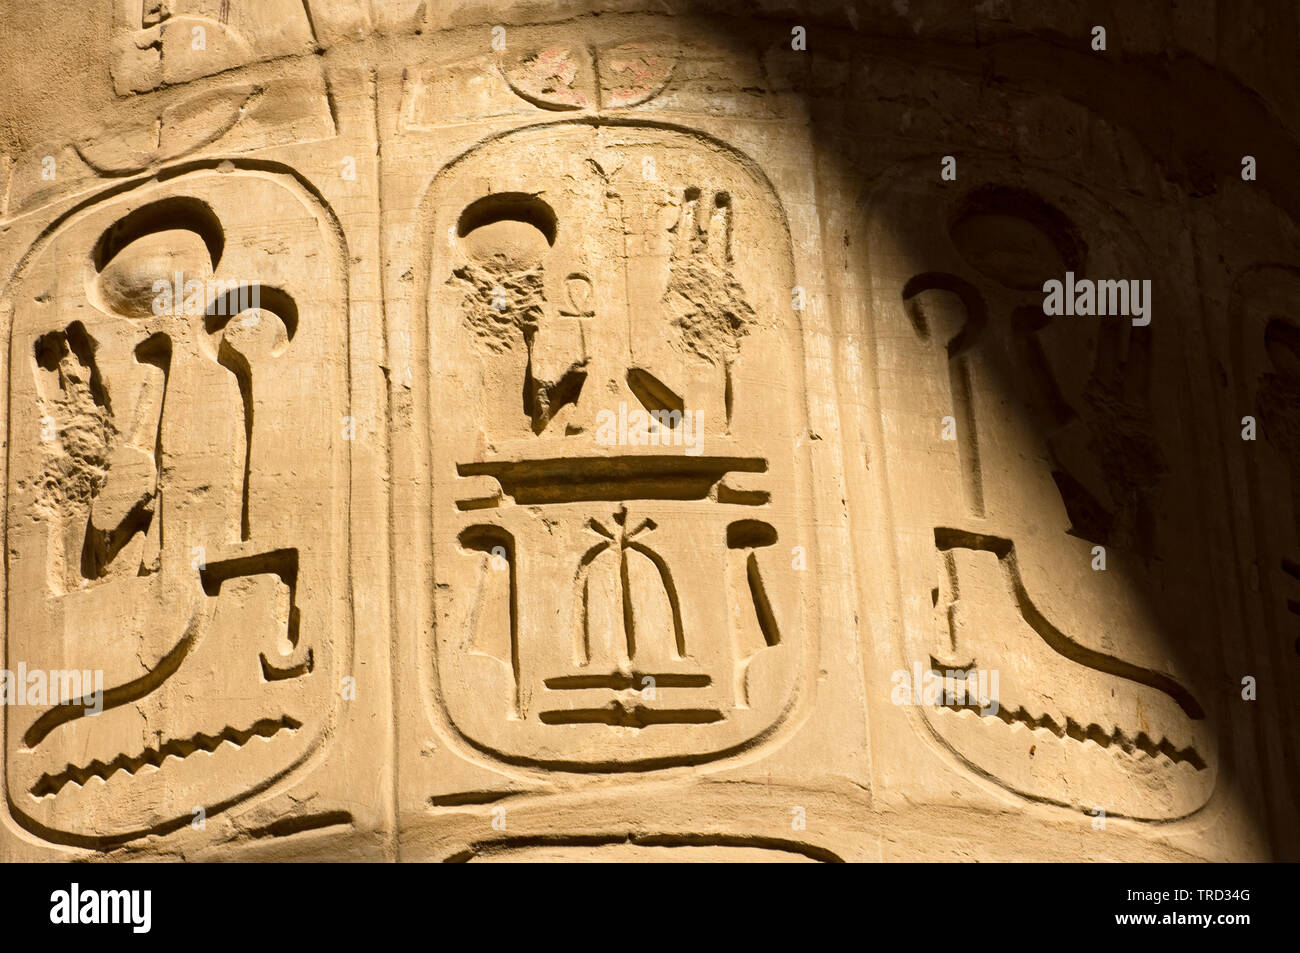 Partially defaced cartouches on a column in the Great Hypostyle Hall, Temple of Amun, Karnak, Luxor, Egypt Stock Photo